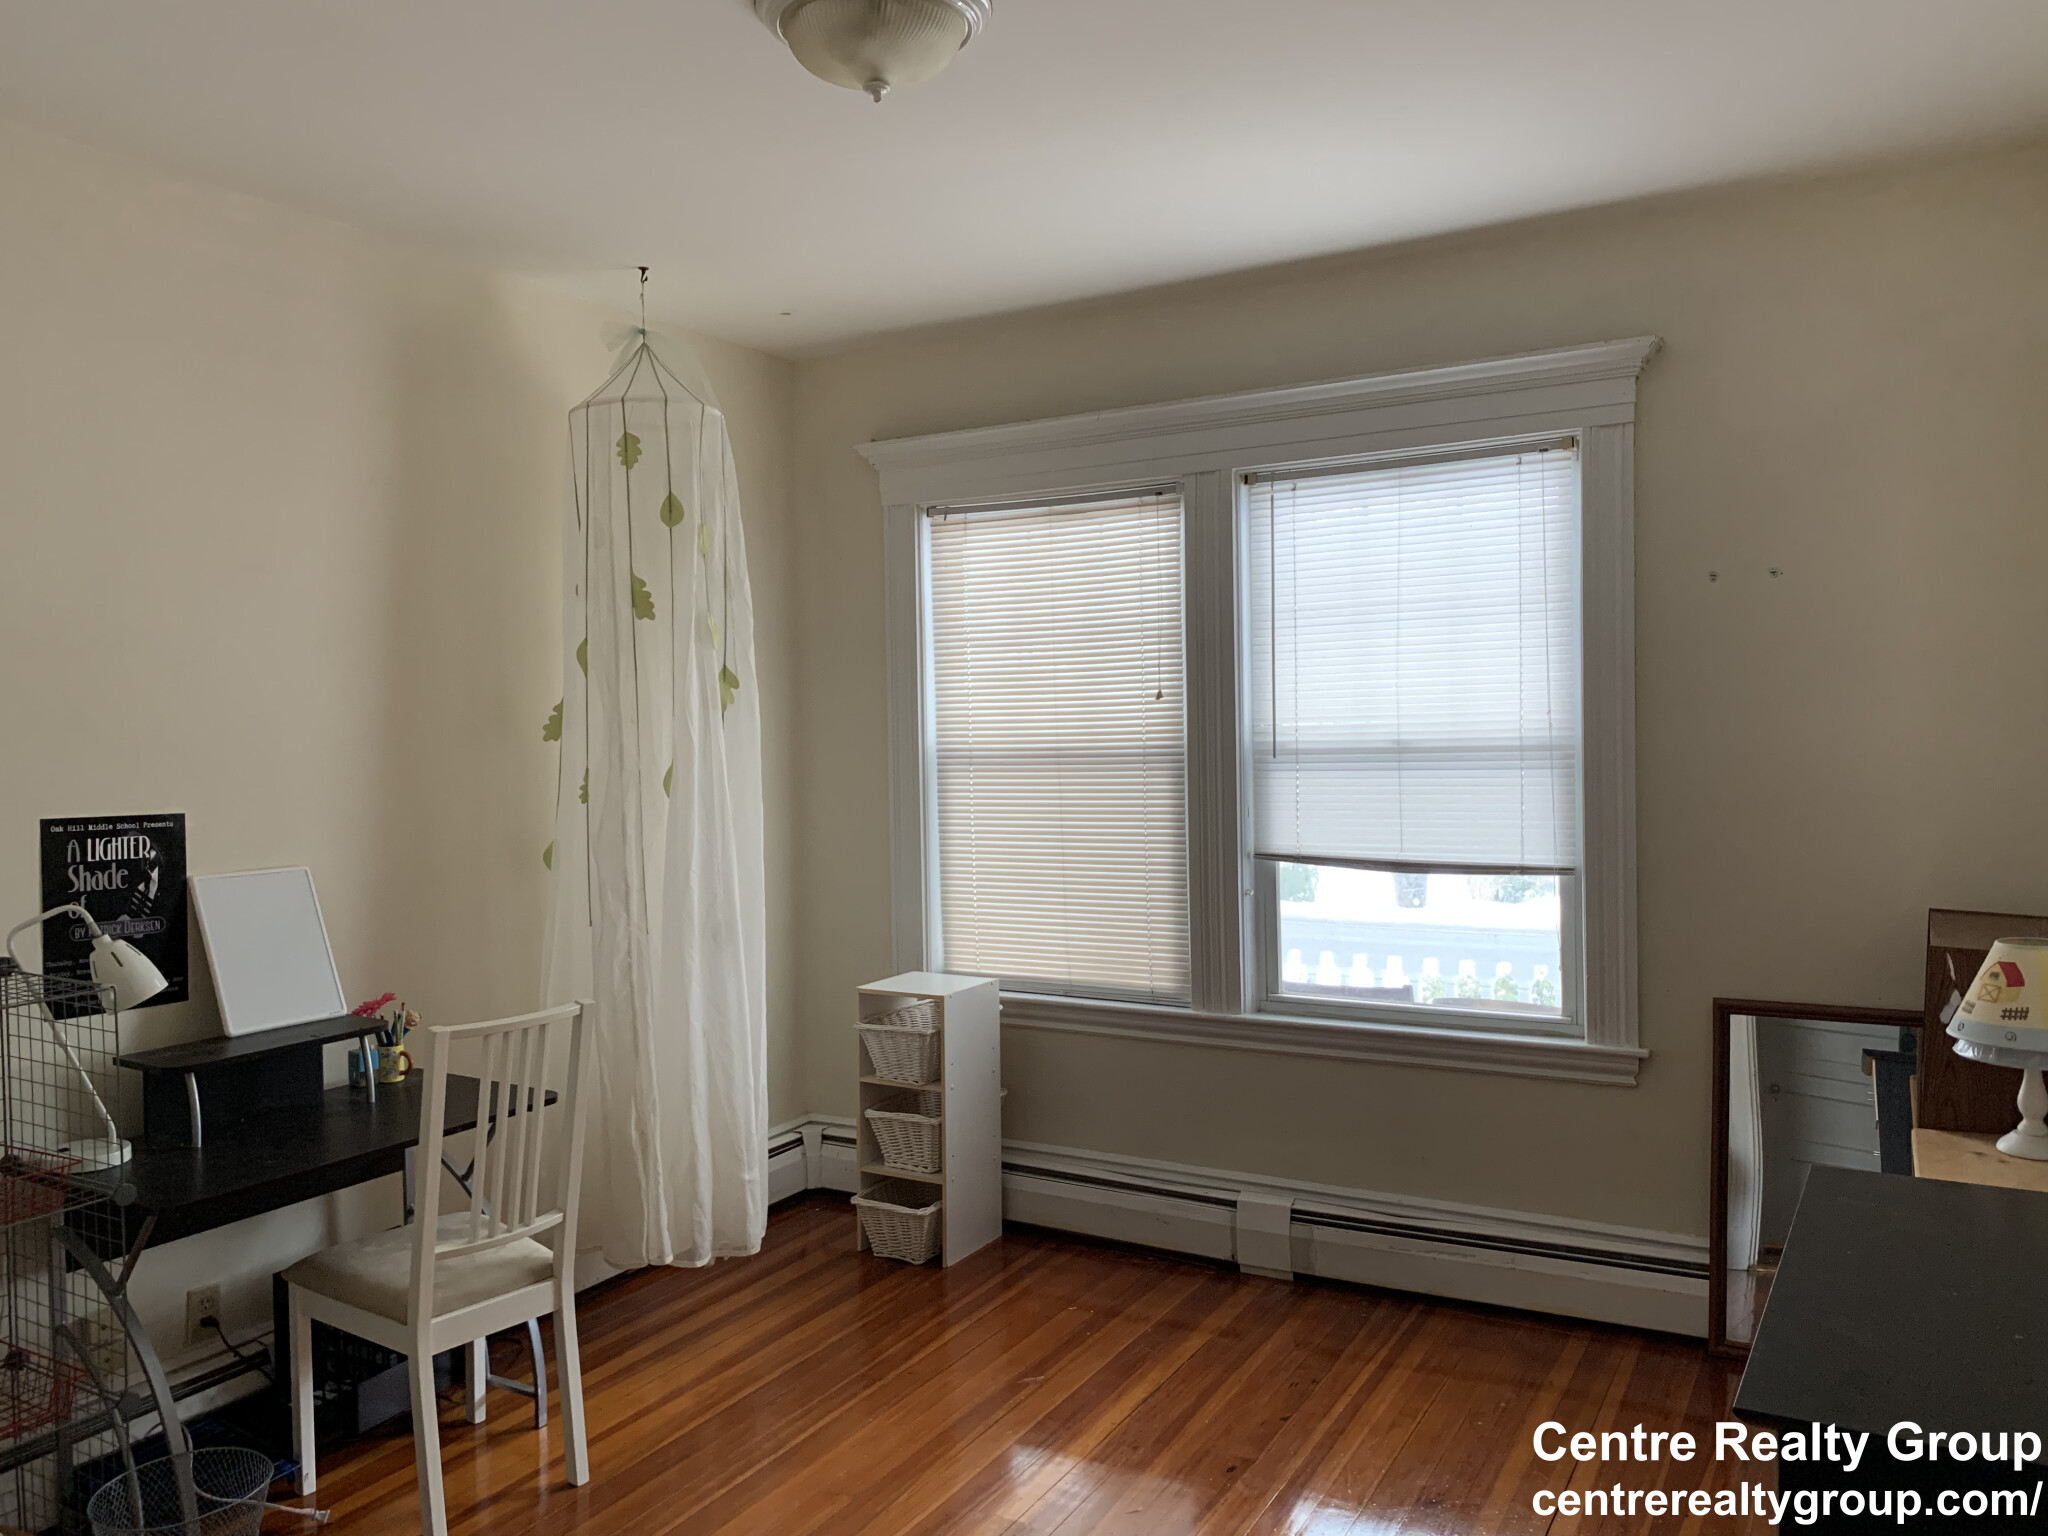 Photos of apartment on Middlesex Rd.,Newton MA 02467